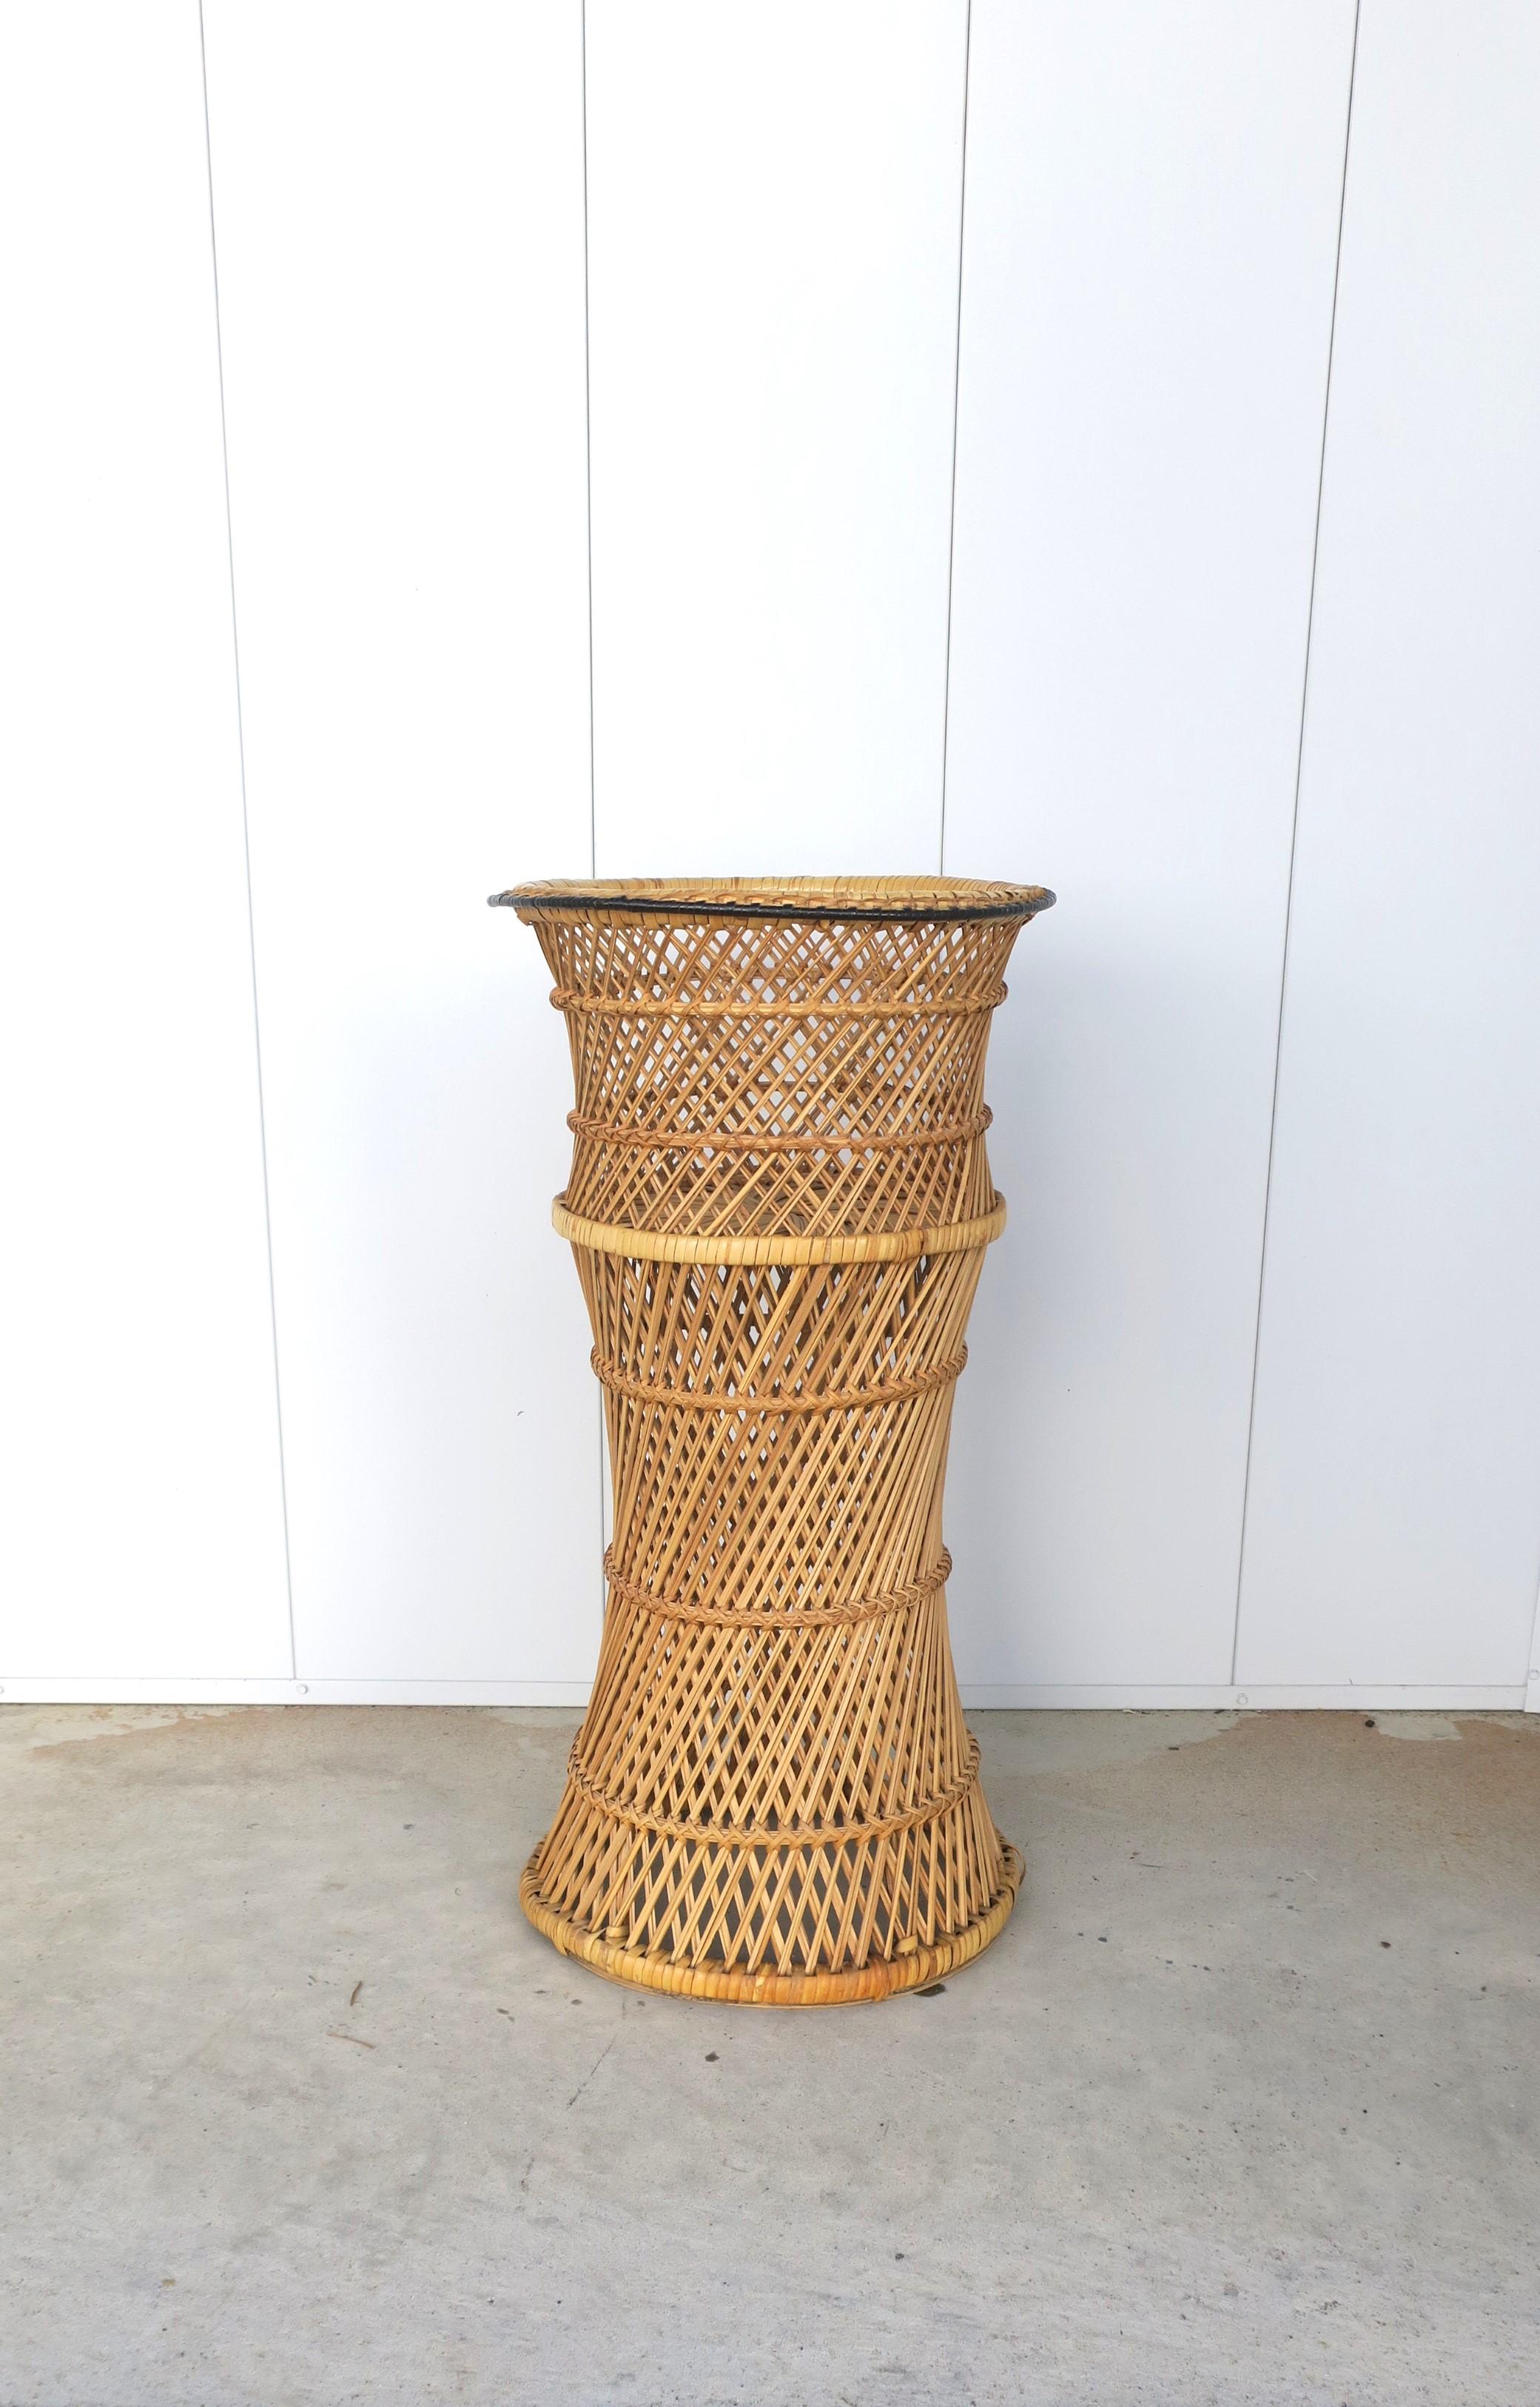 A tall wicker flower or plant cachepot jardiniere holder stand, circa mid to late-20th century. A great piece to elevate a flower or plant, indoors or outside covered patio/area. Piece is in the style of Emmanuelle Peacock. Dimensions include the